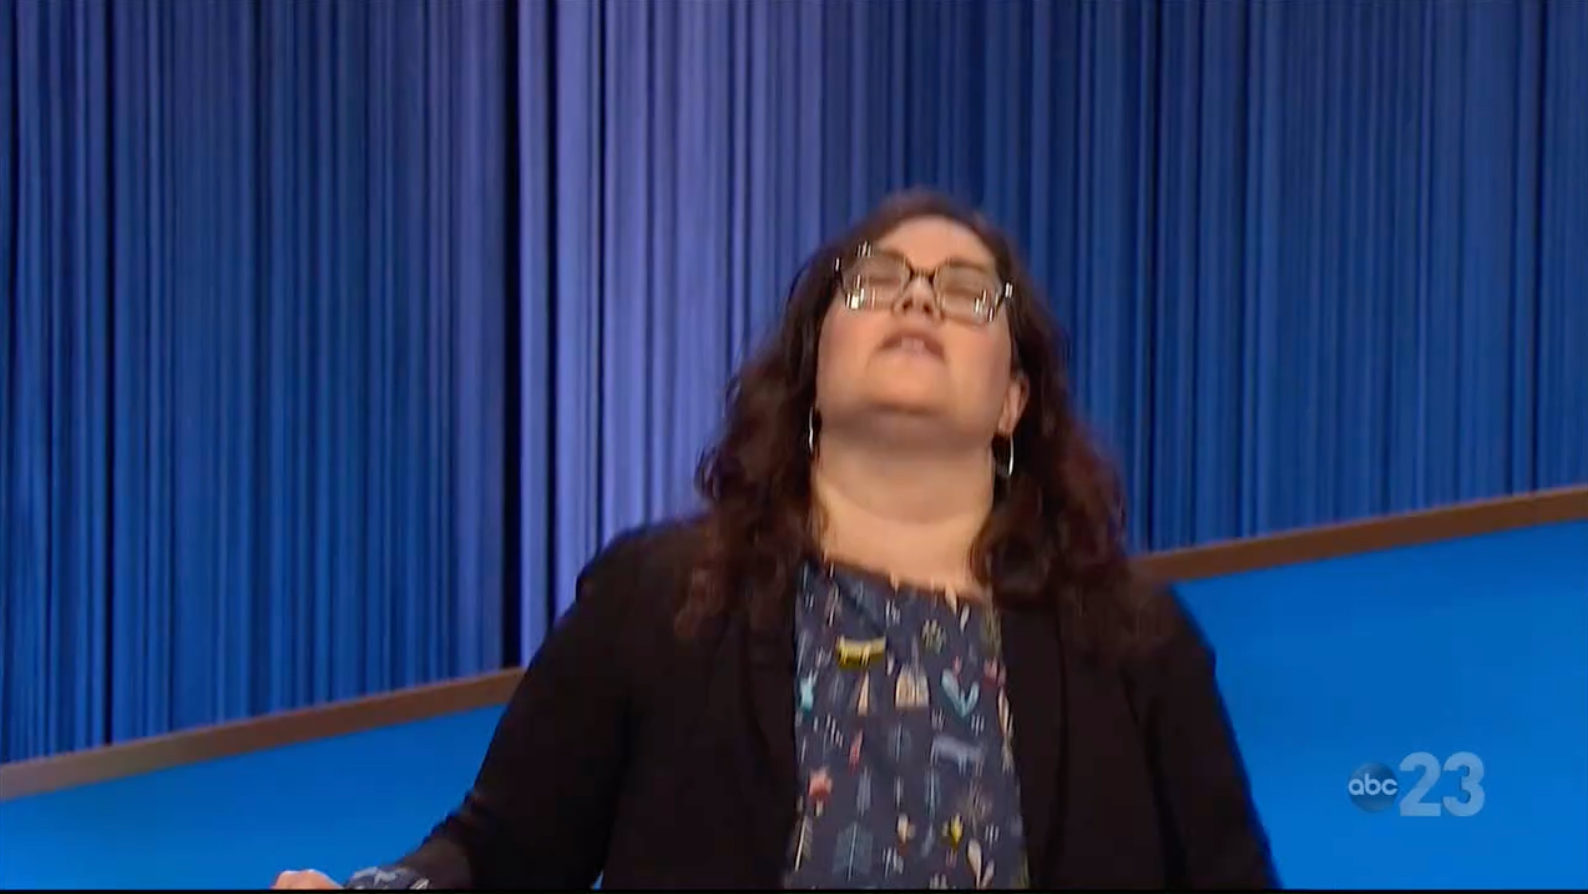 Tamara hit her Jeopardy! buzzer after missing the clue